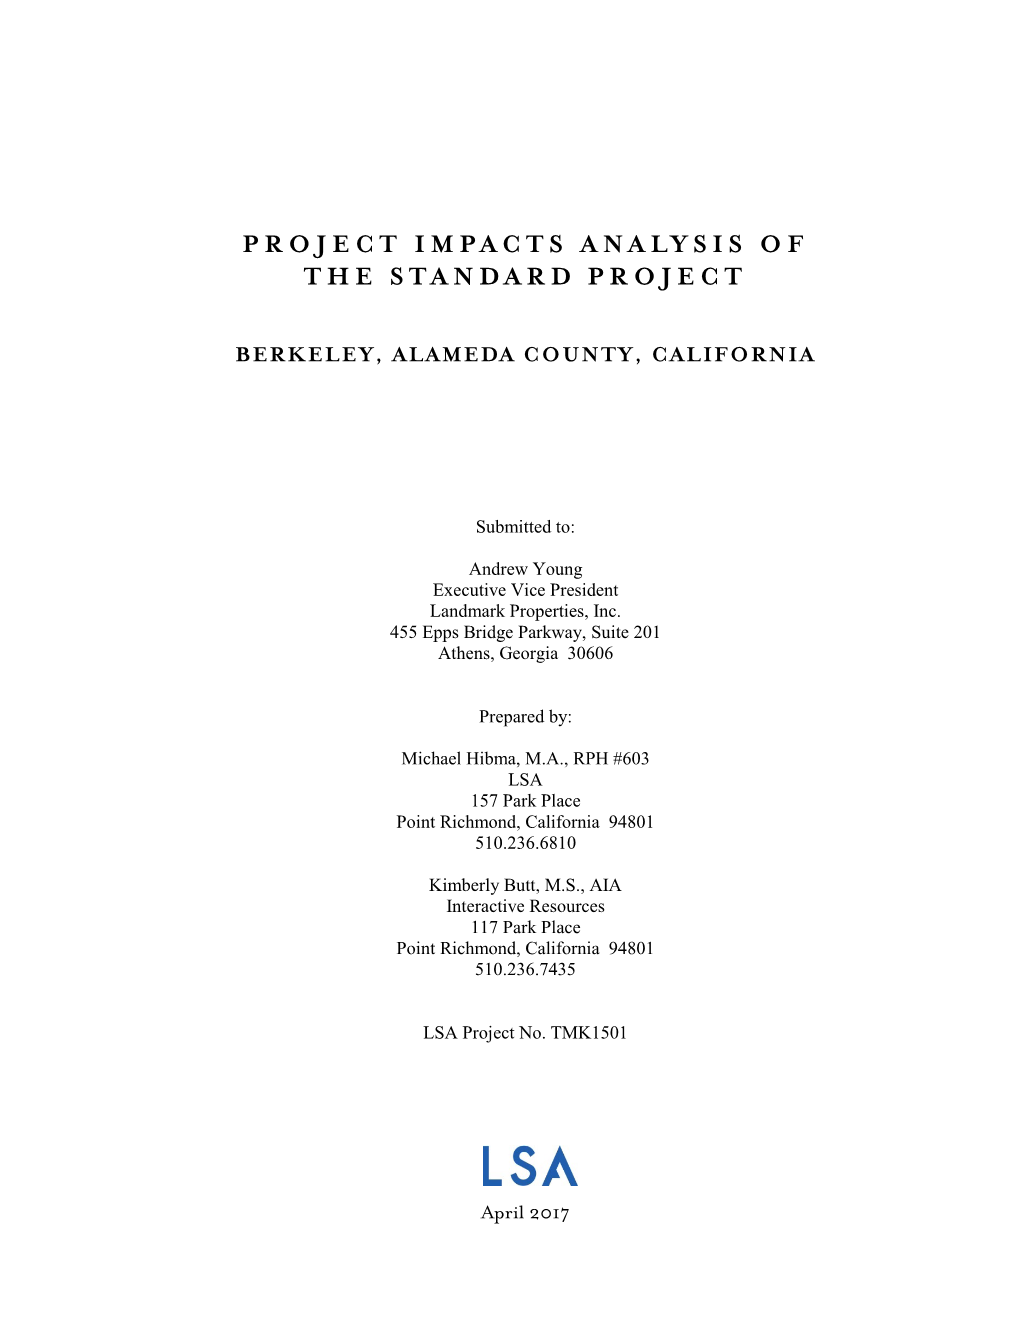 Project Impacts Analysis of the Standard Project